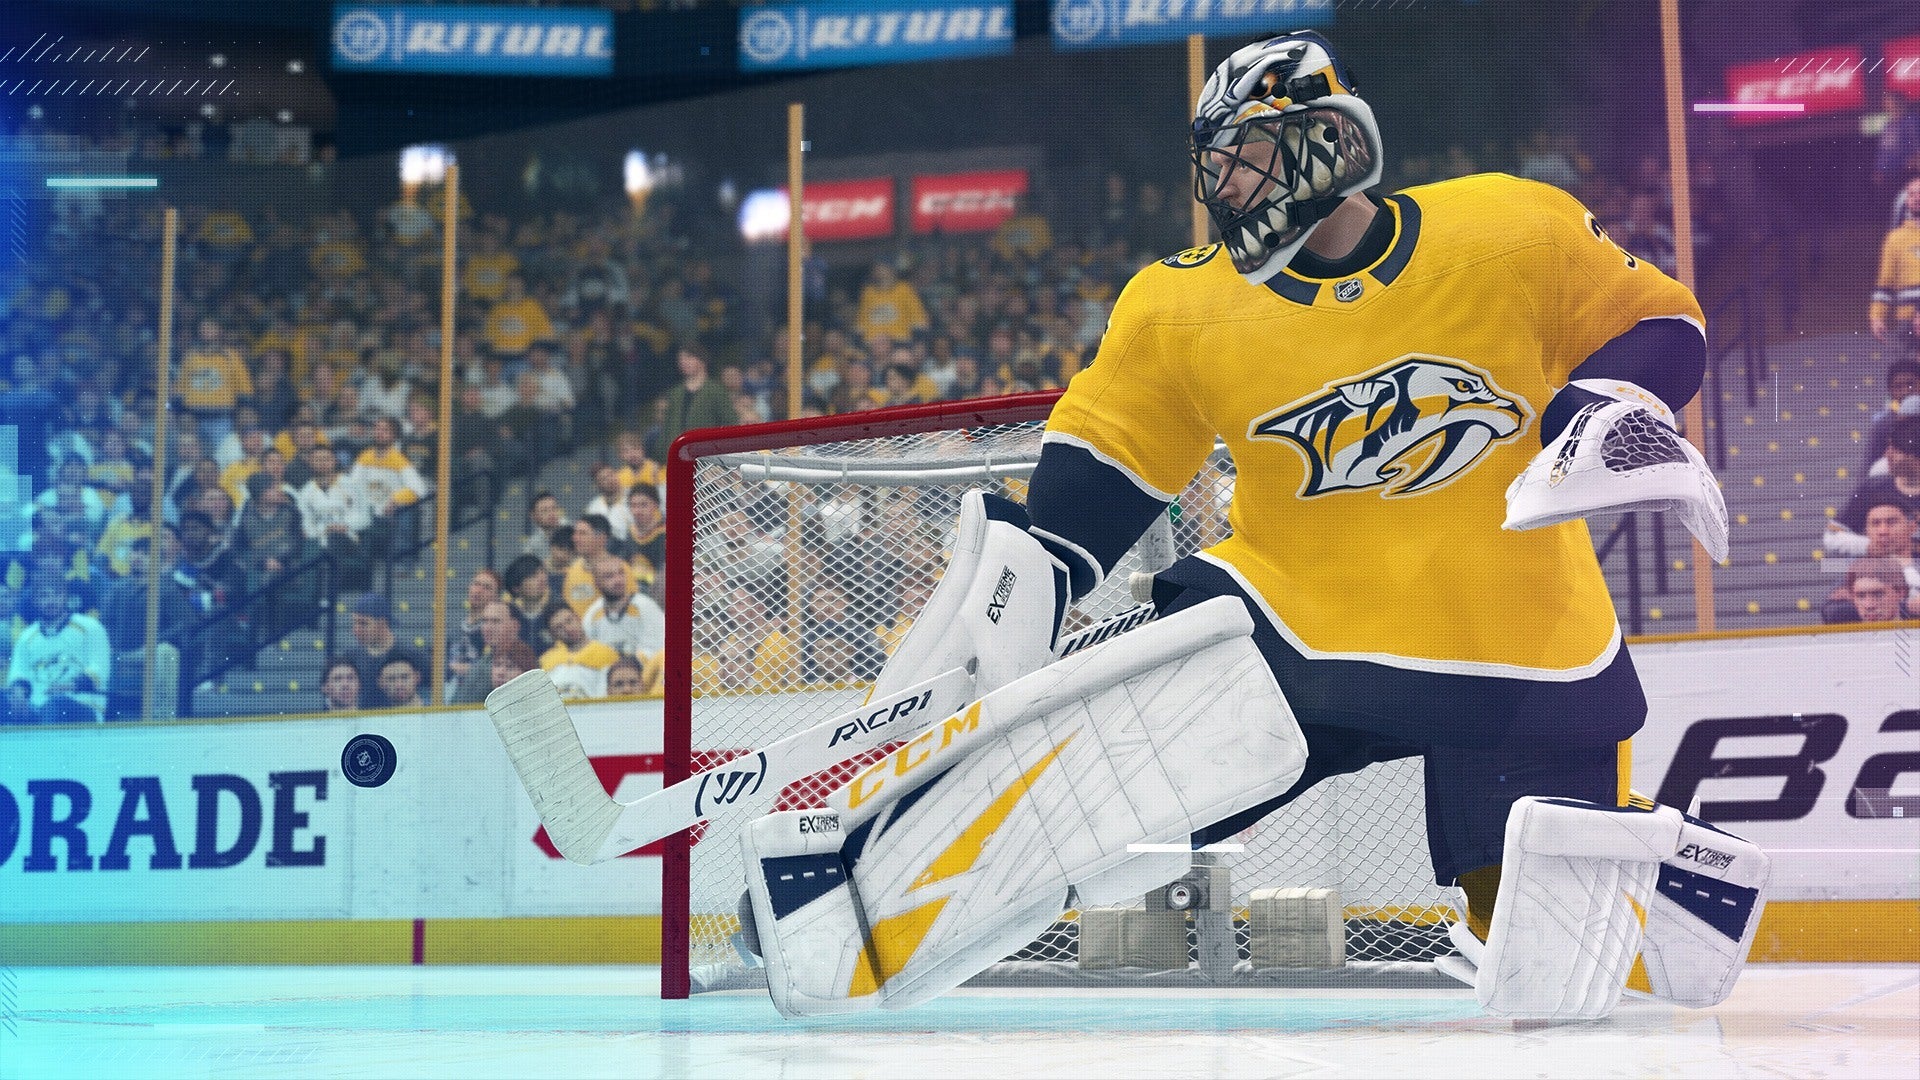 New NHL 20 Update Patch Coming This Week